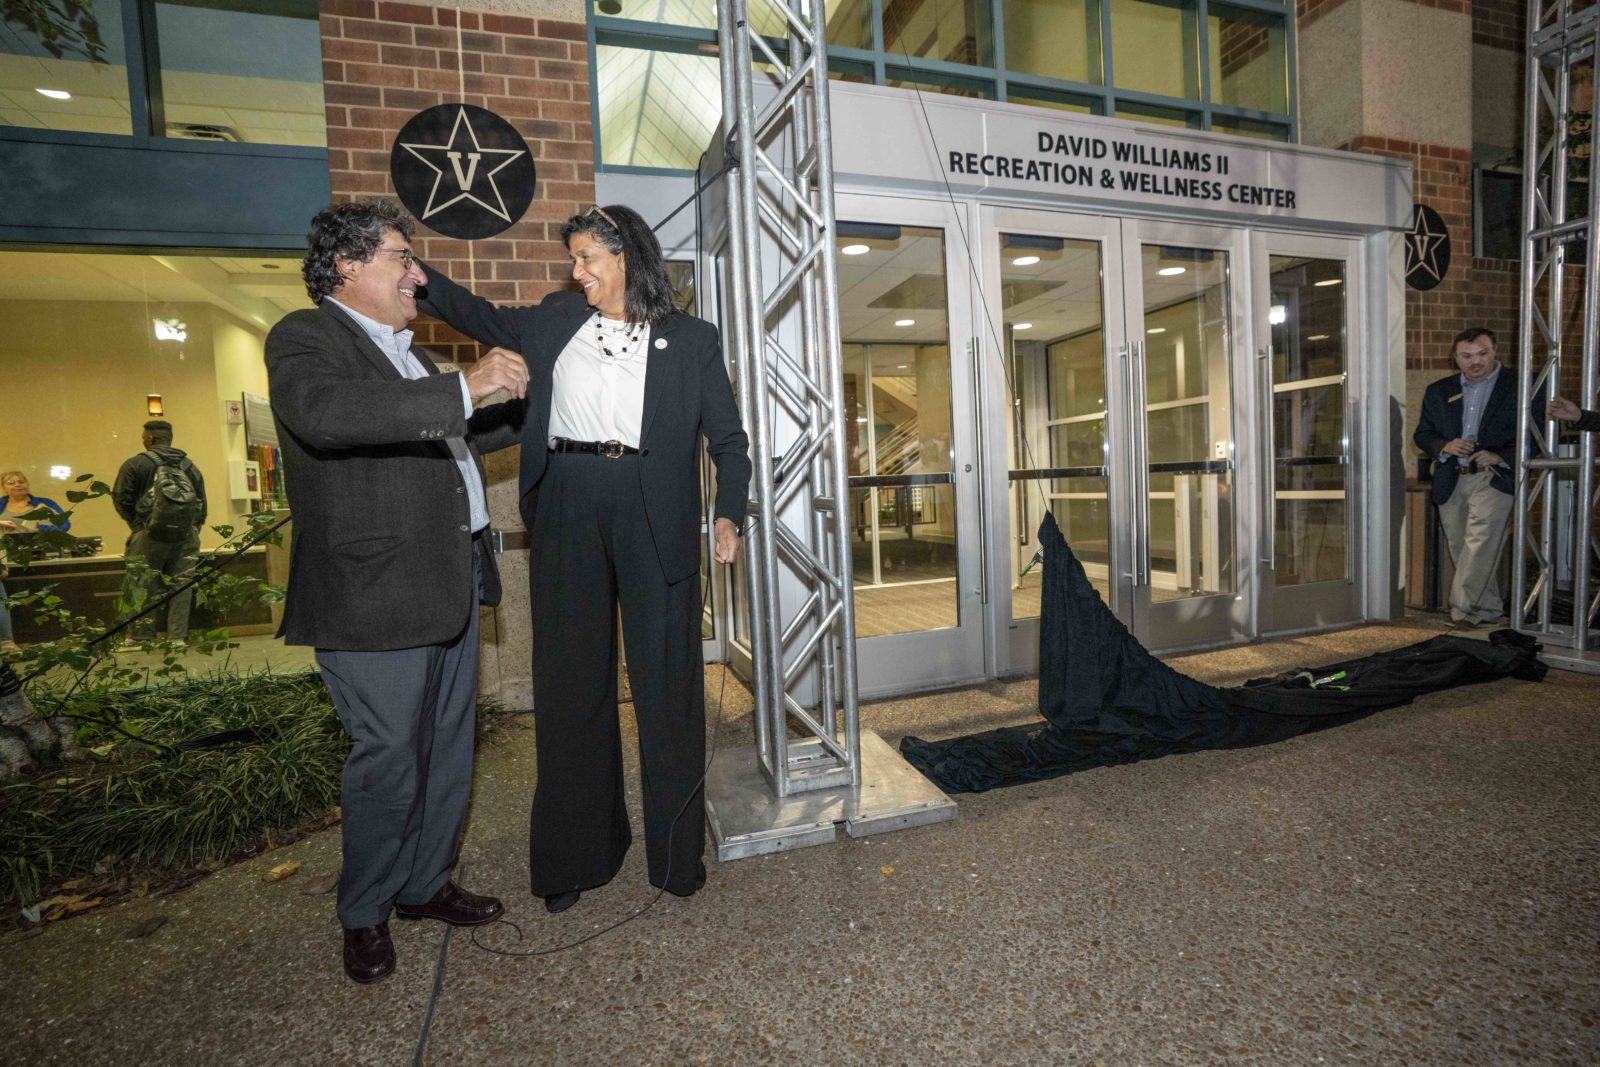 Chancellor Emeritus Nicholas S. Zeppos and Gail Williams next to new signage at the front of the David Williams II Recreation and Wellness Center. (John Russell/Vanderbilt University)